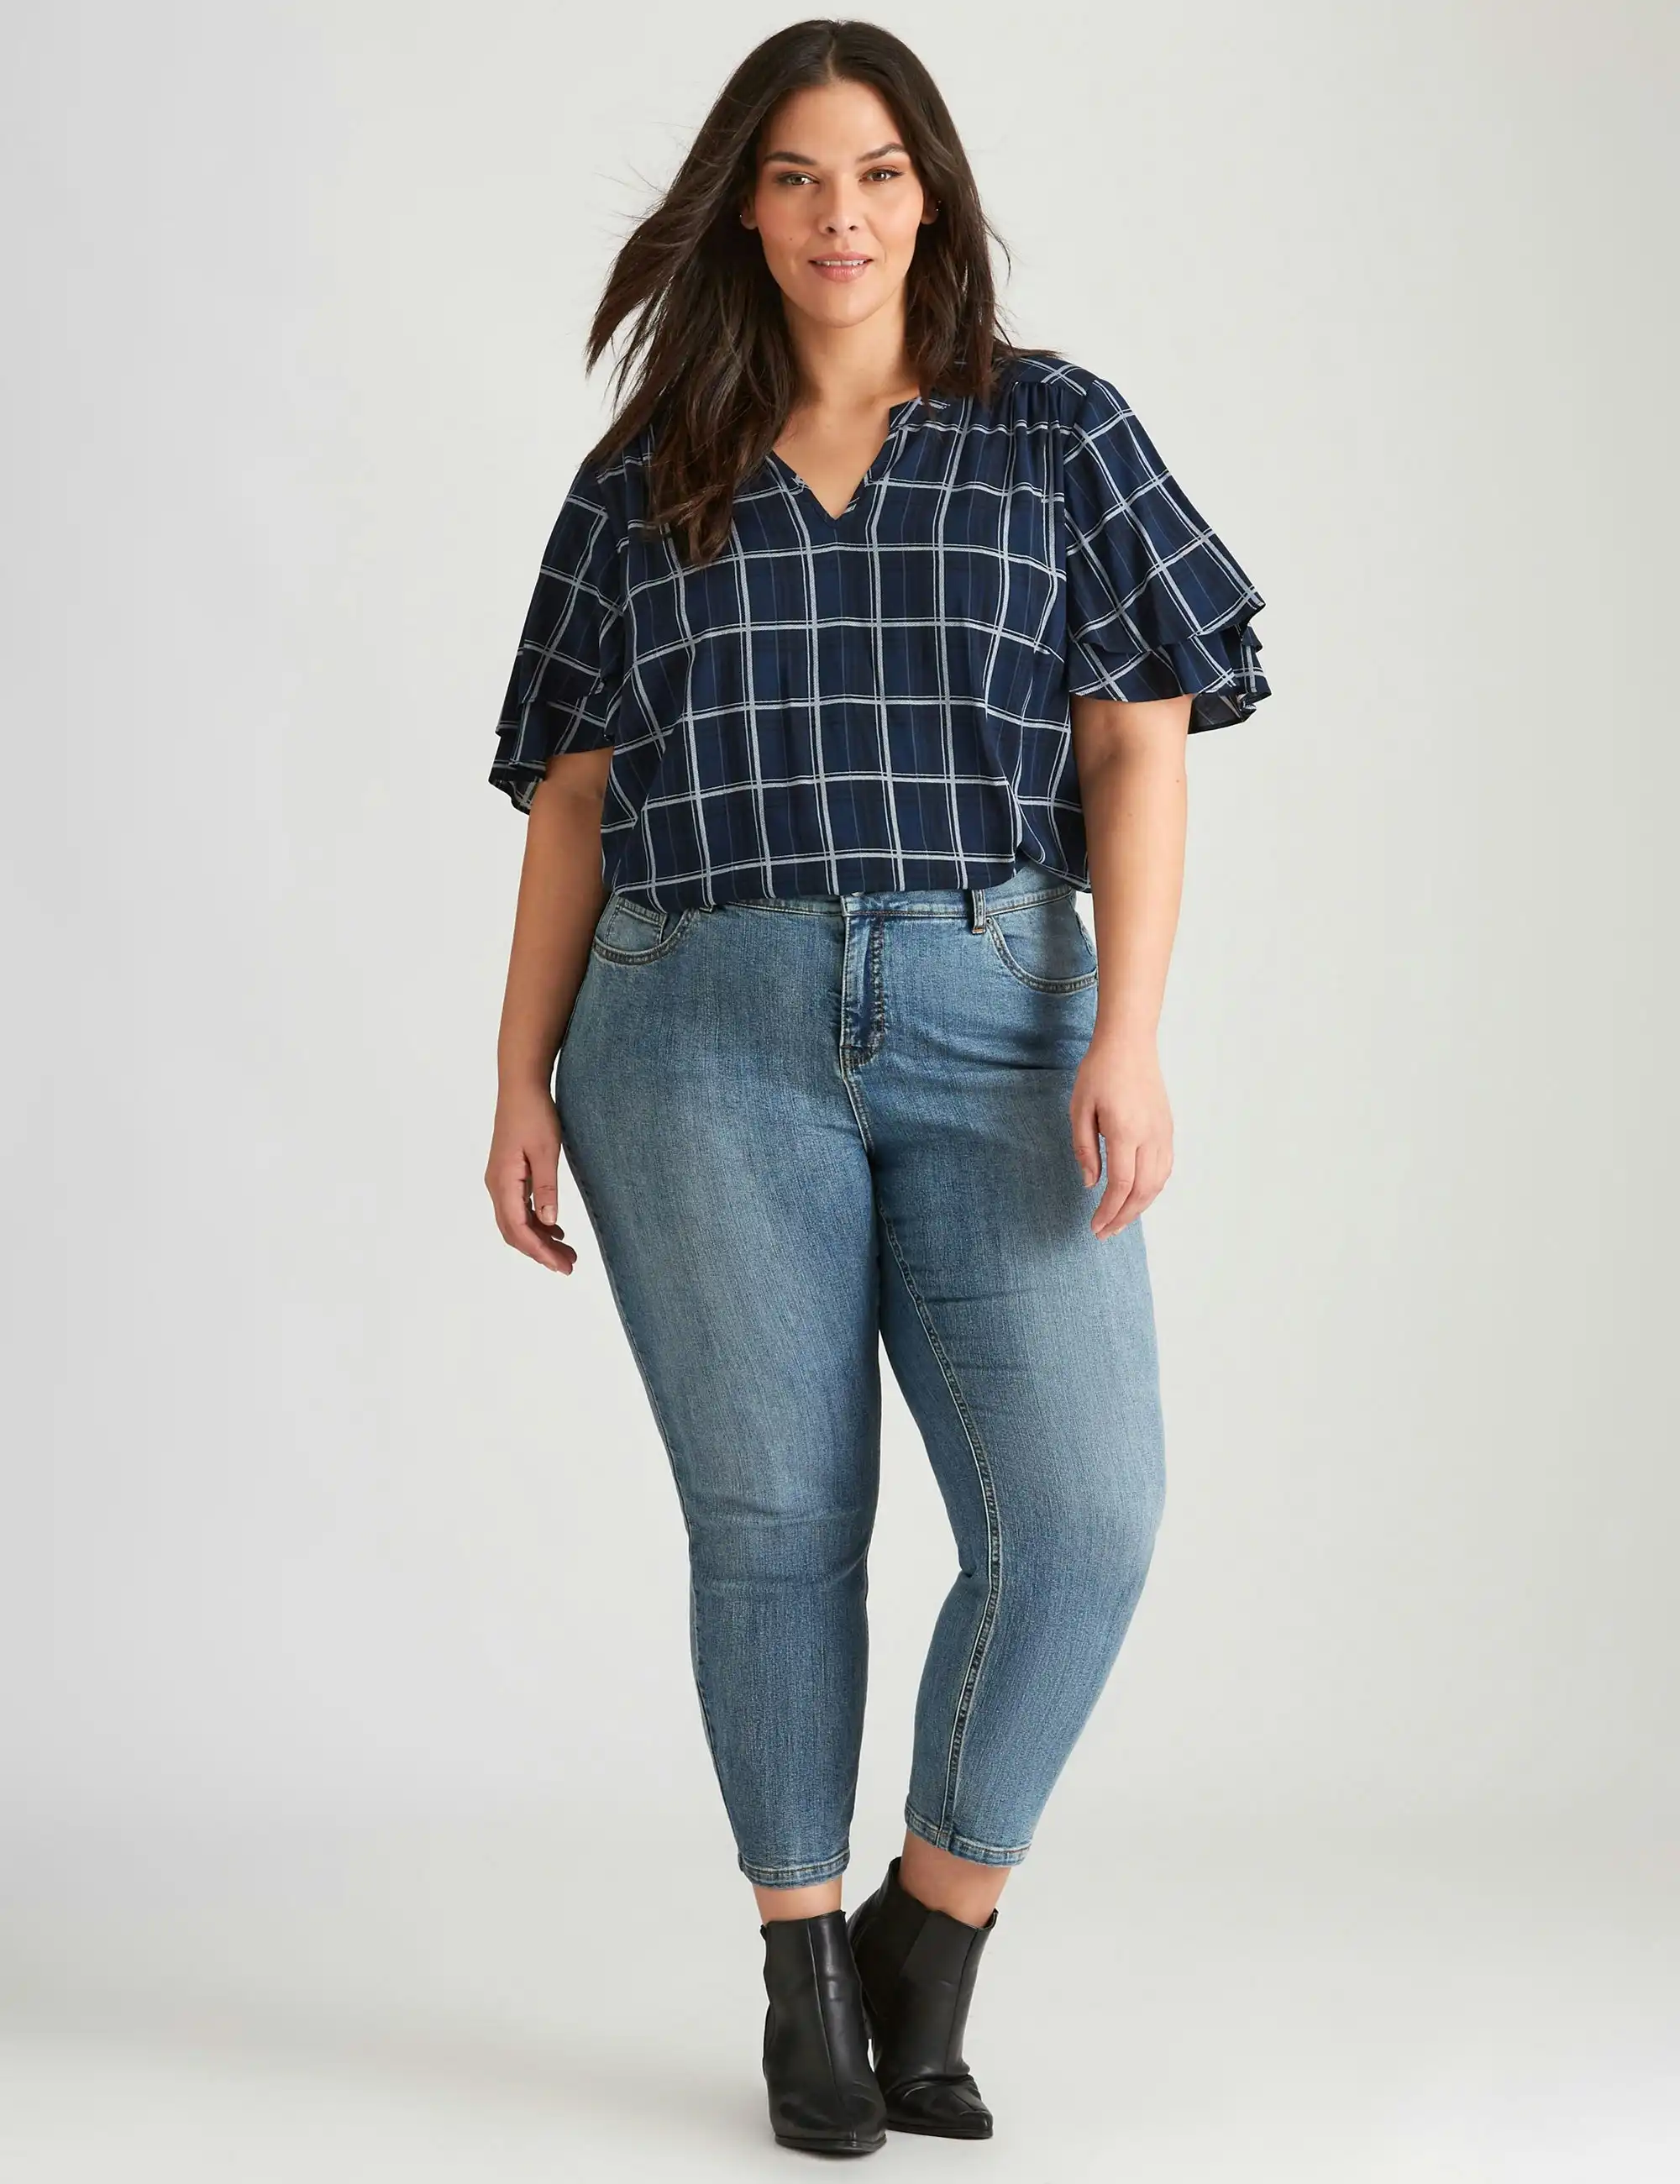 Autograph Woven Flutter Sleeve Check Top (Y/D Check)